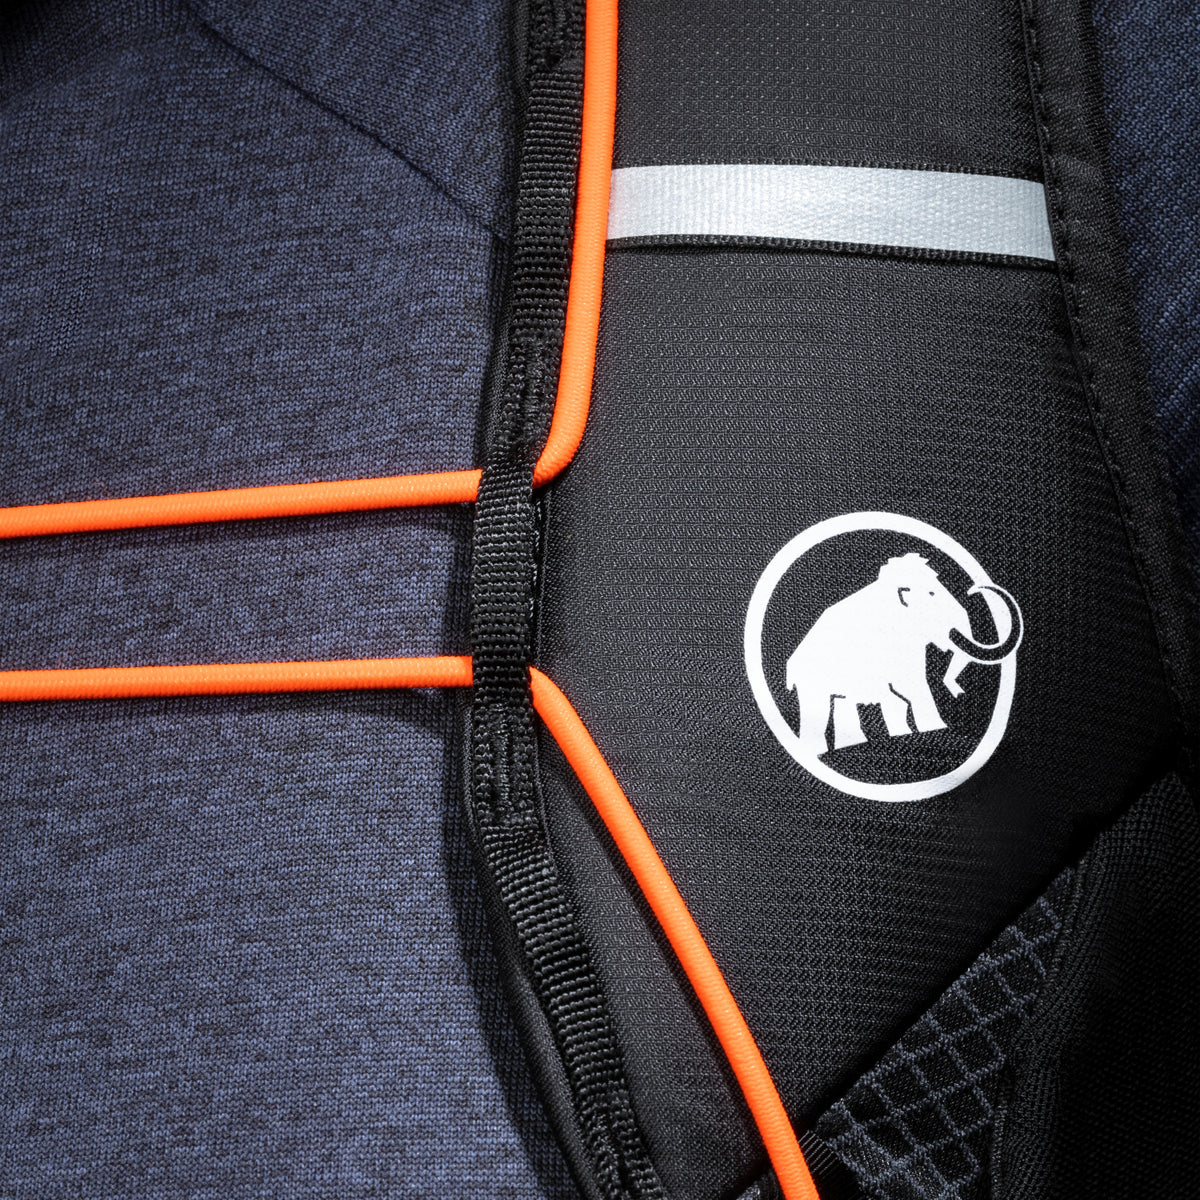 Mammut Trion Nordwand 38 black - showing chest strap